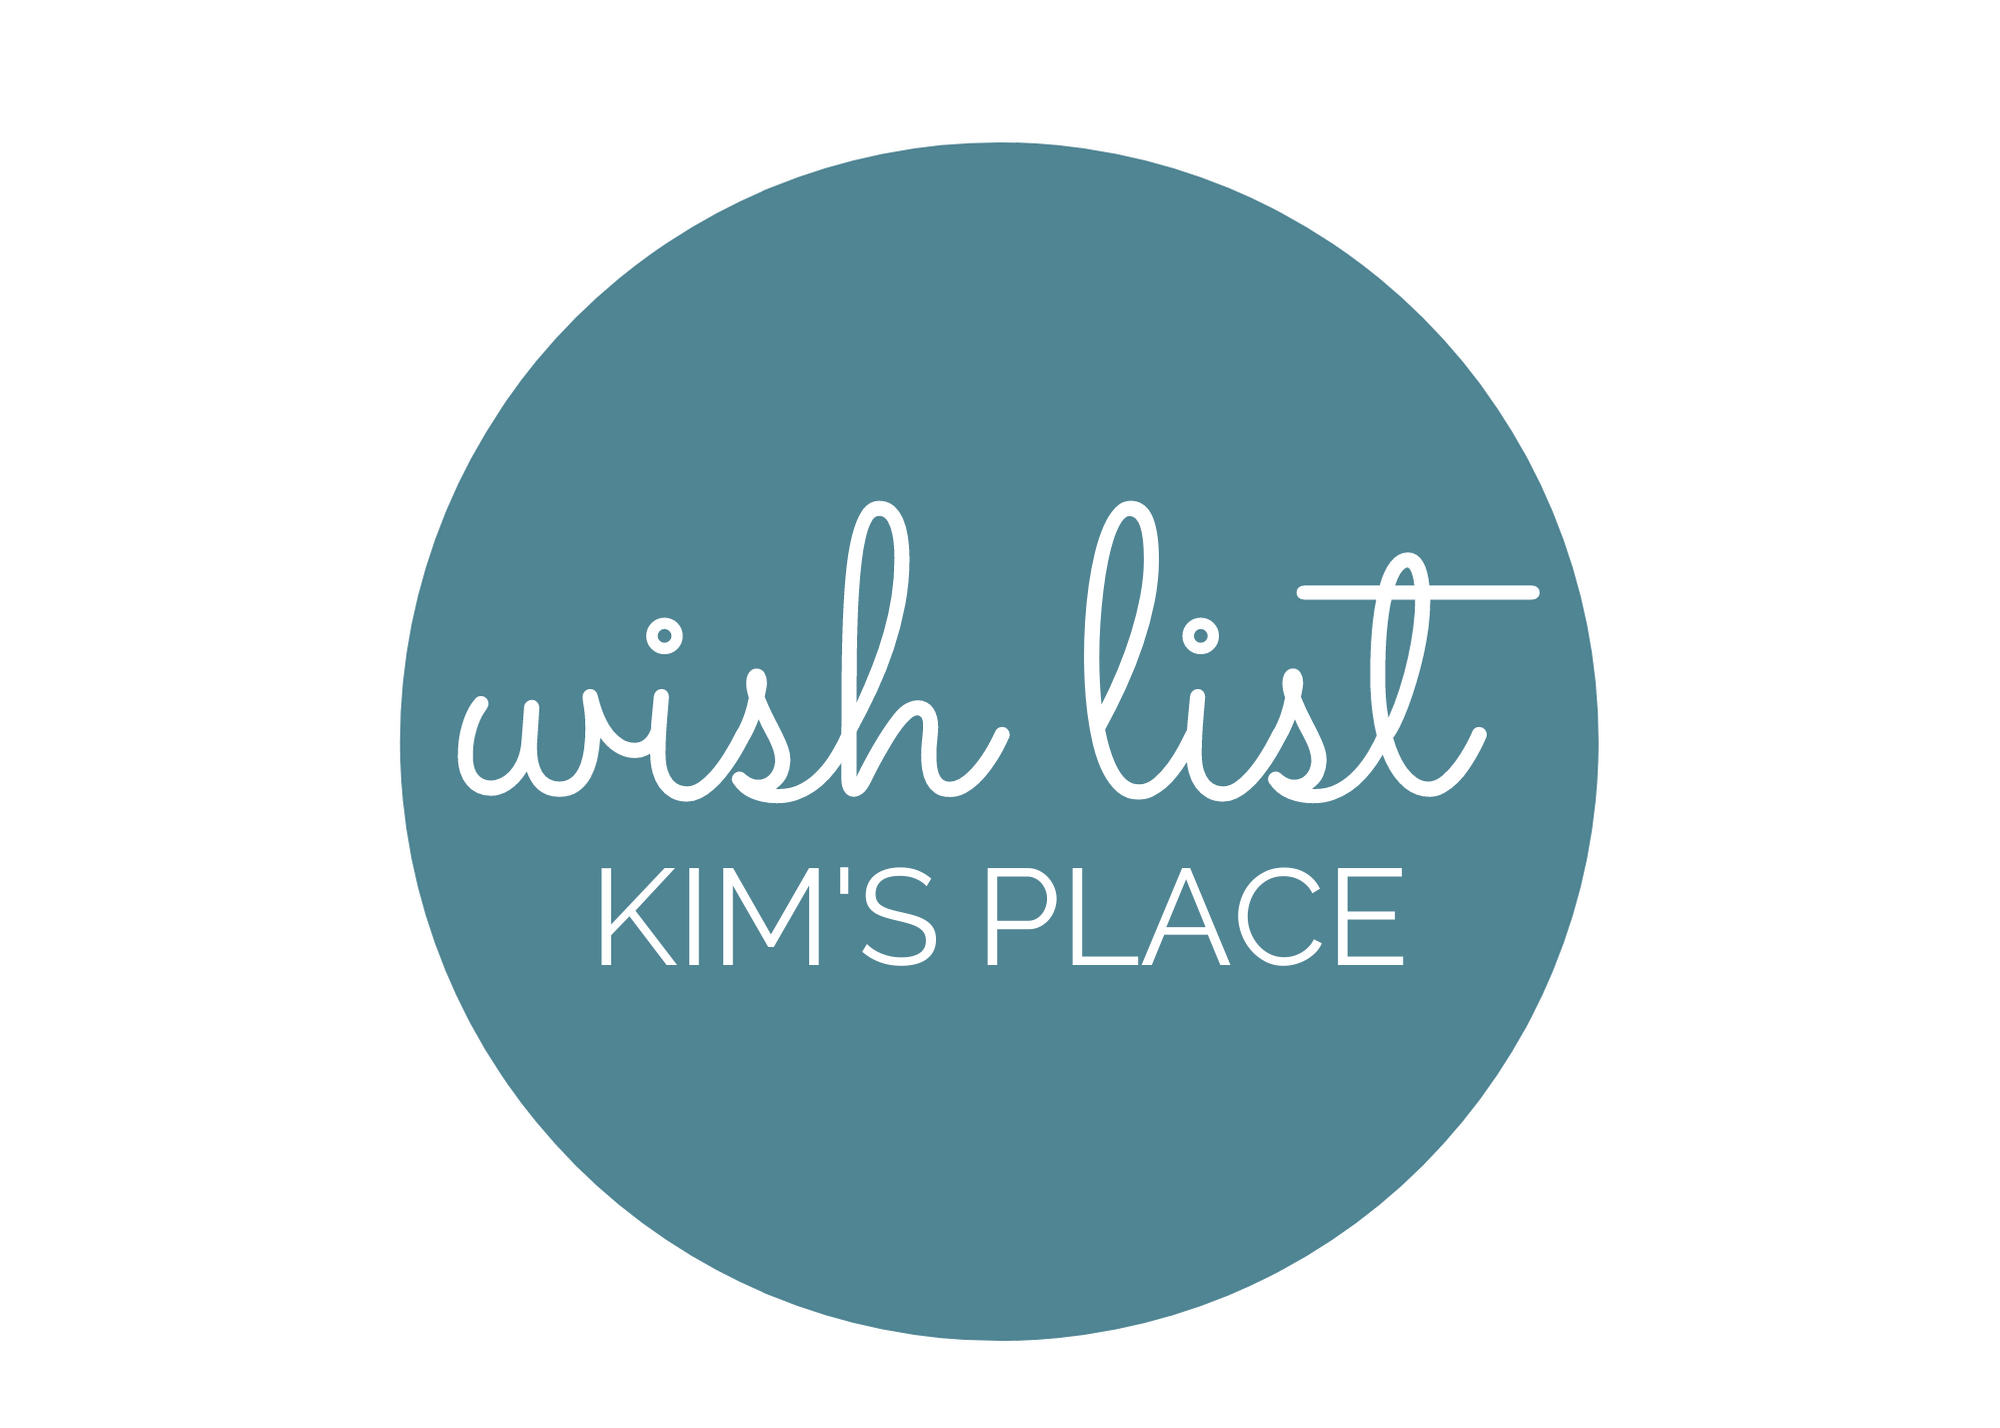 View the Kim's Place Wish List